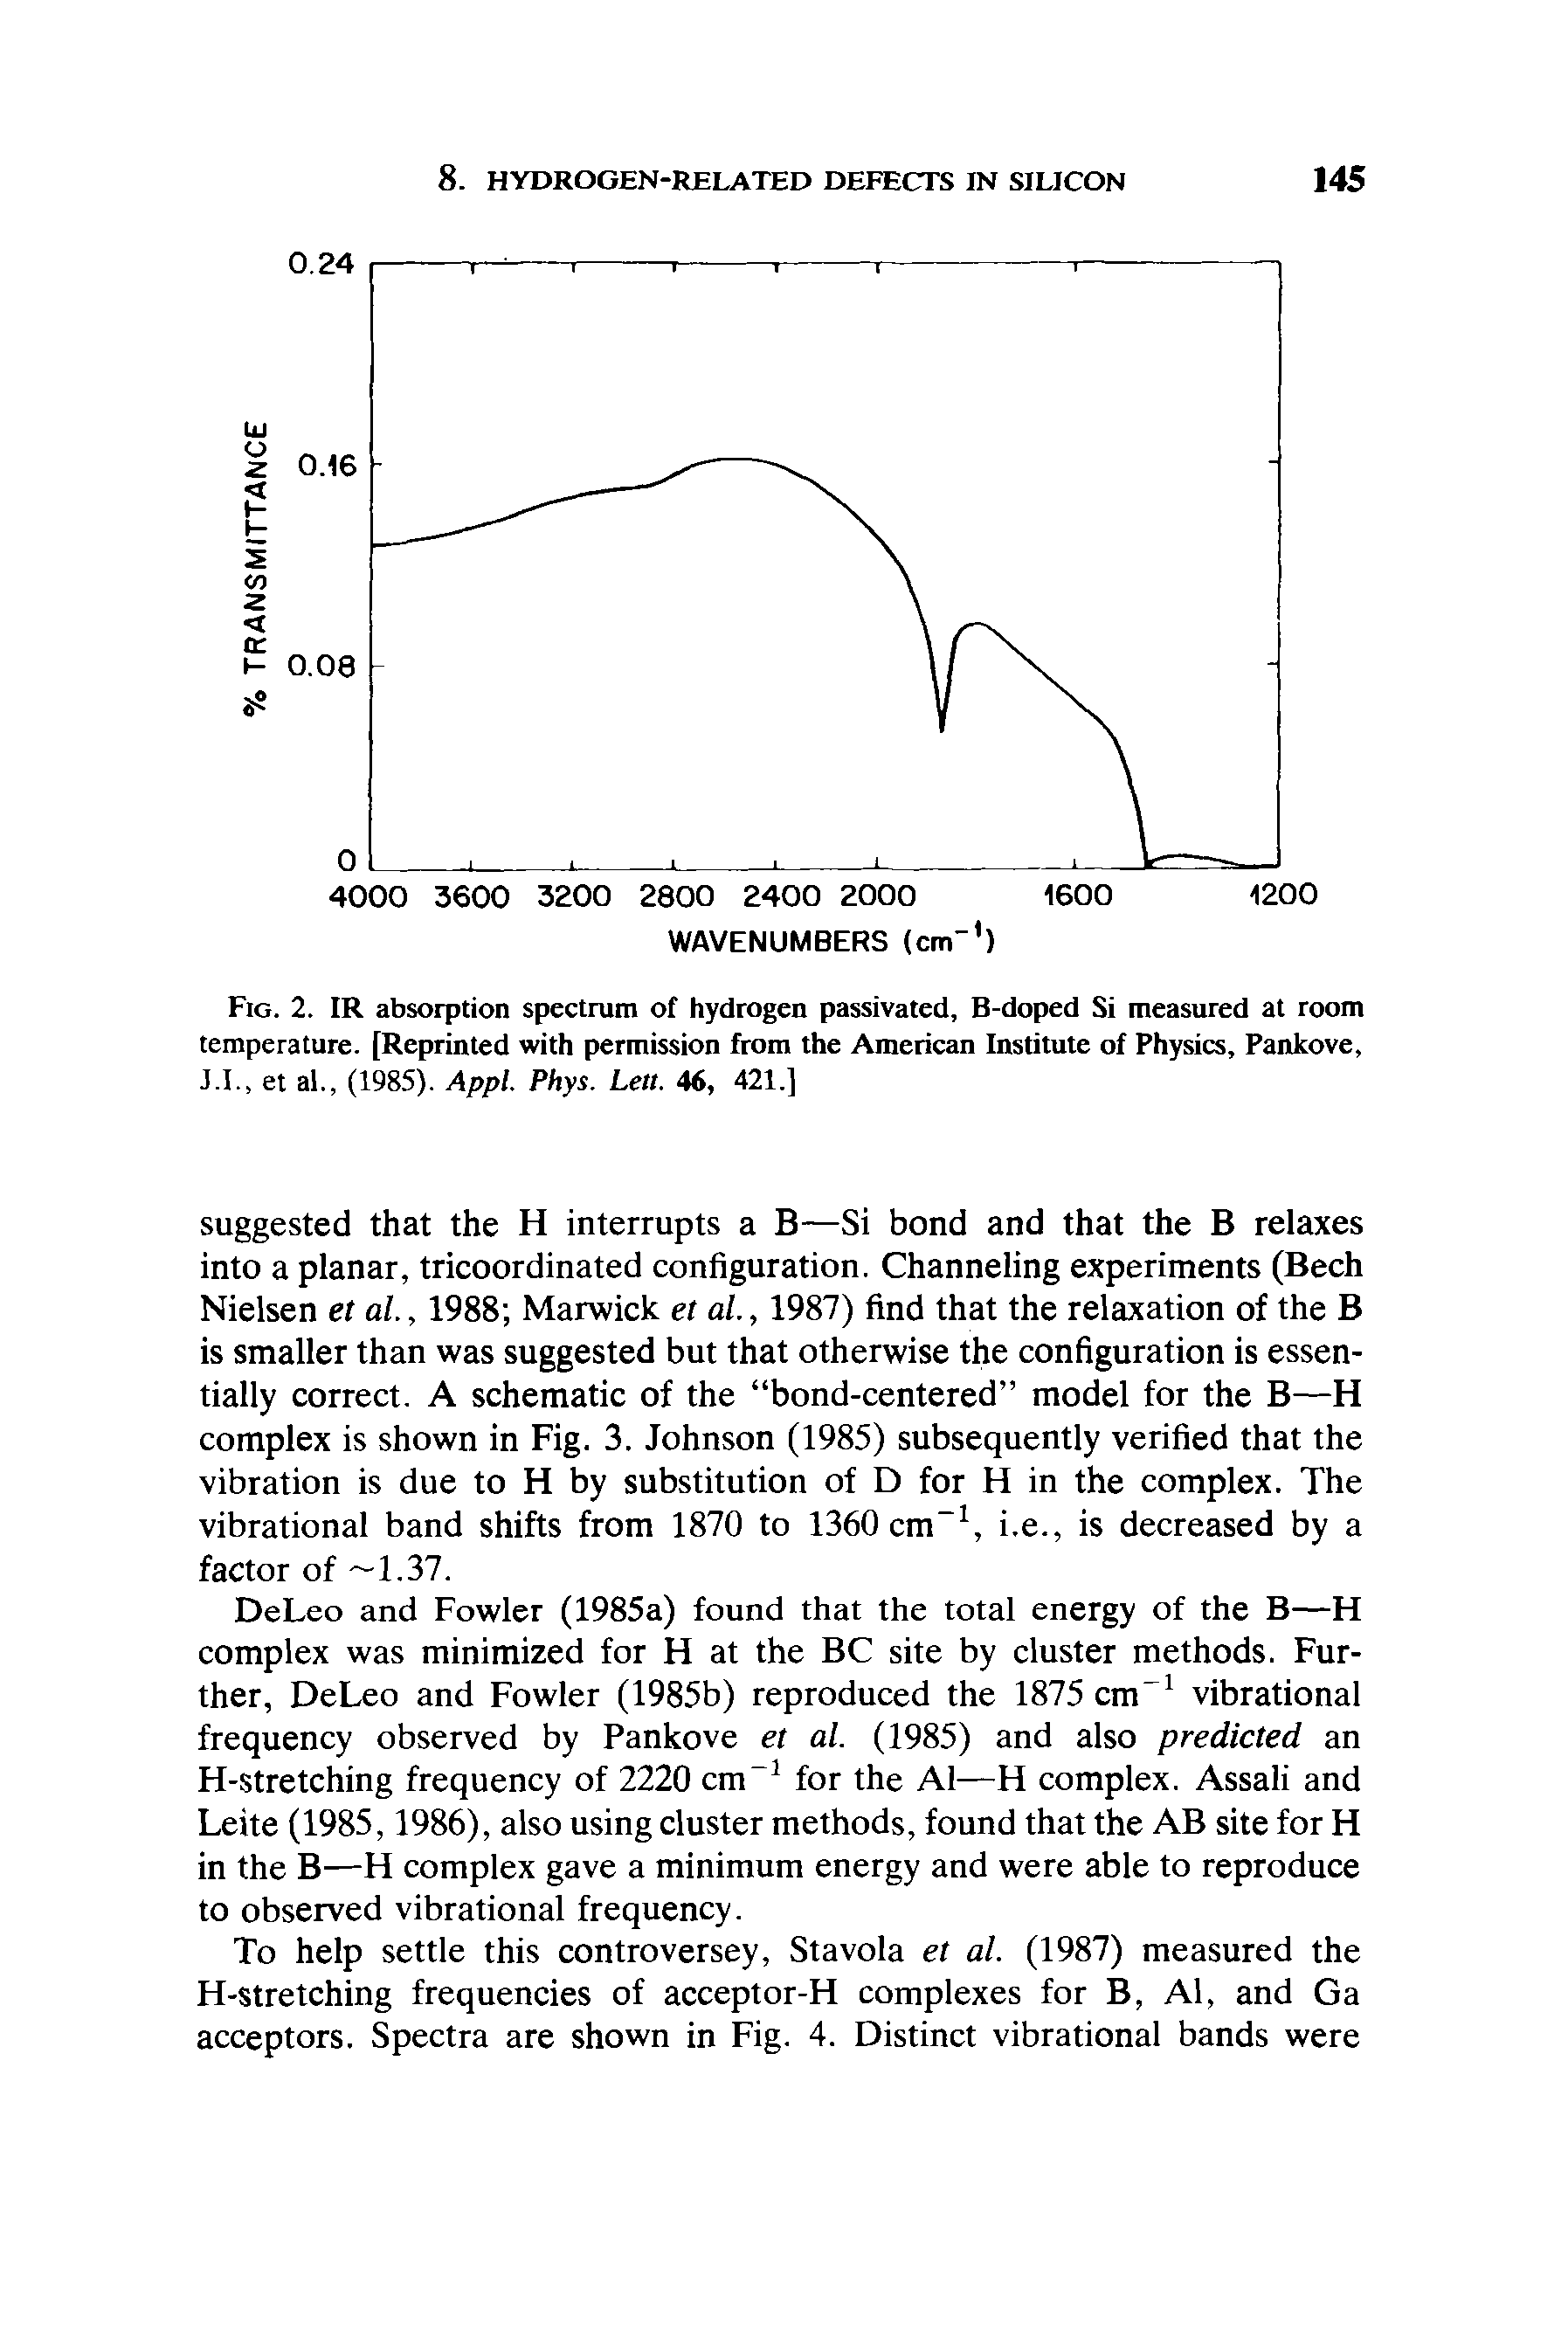 Fig. 2. IR absorption spectrum of hydrogen passivated, B-doped Si measured at room temperature. [Reprinted with permission from the American Institute of Physics, Pankove, J.I., et al., (1985). Appl. Phys. Lett. 46, 421.]...